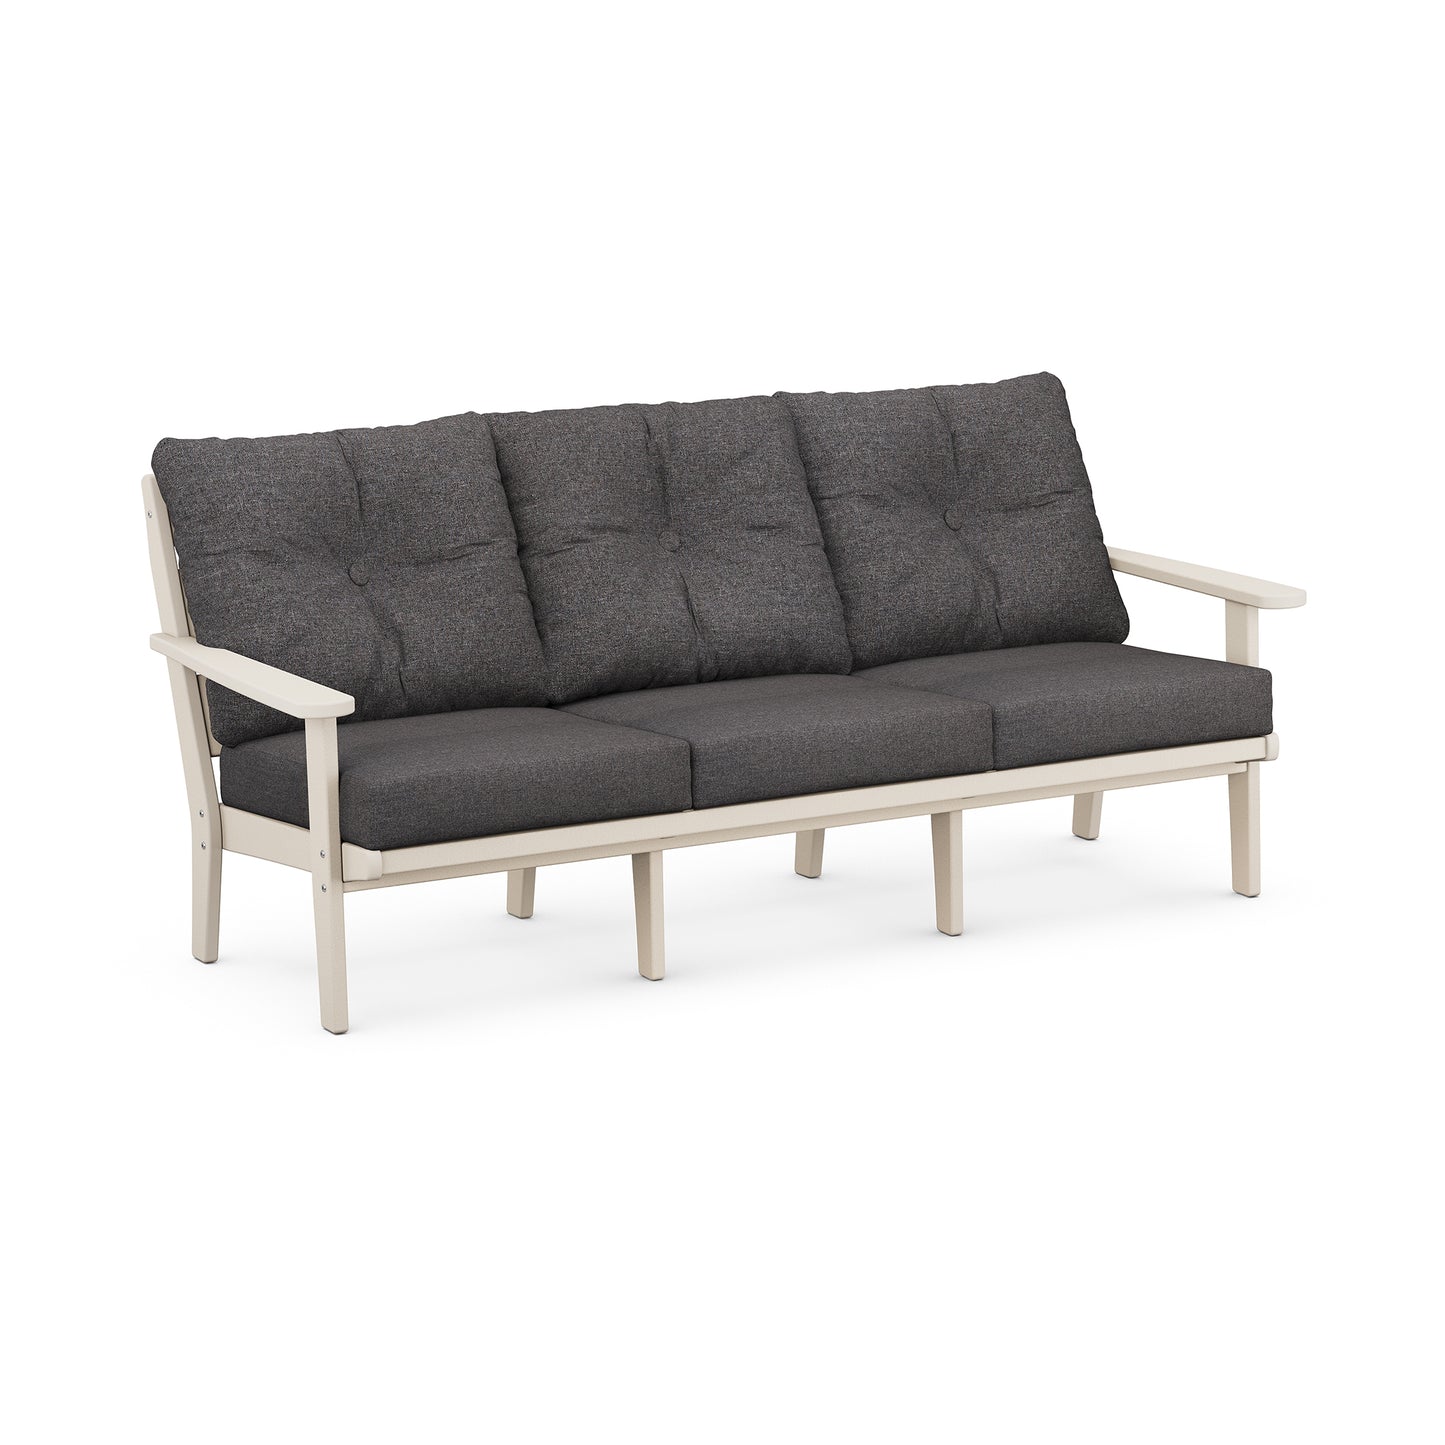 A modern three-seater outdoor sofa with a light beige POLYWOOD Lakeside Deep Seating Sofa frame and dark gray cushions, displayed on a white background.